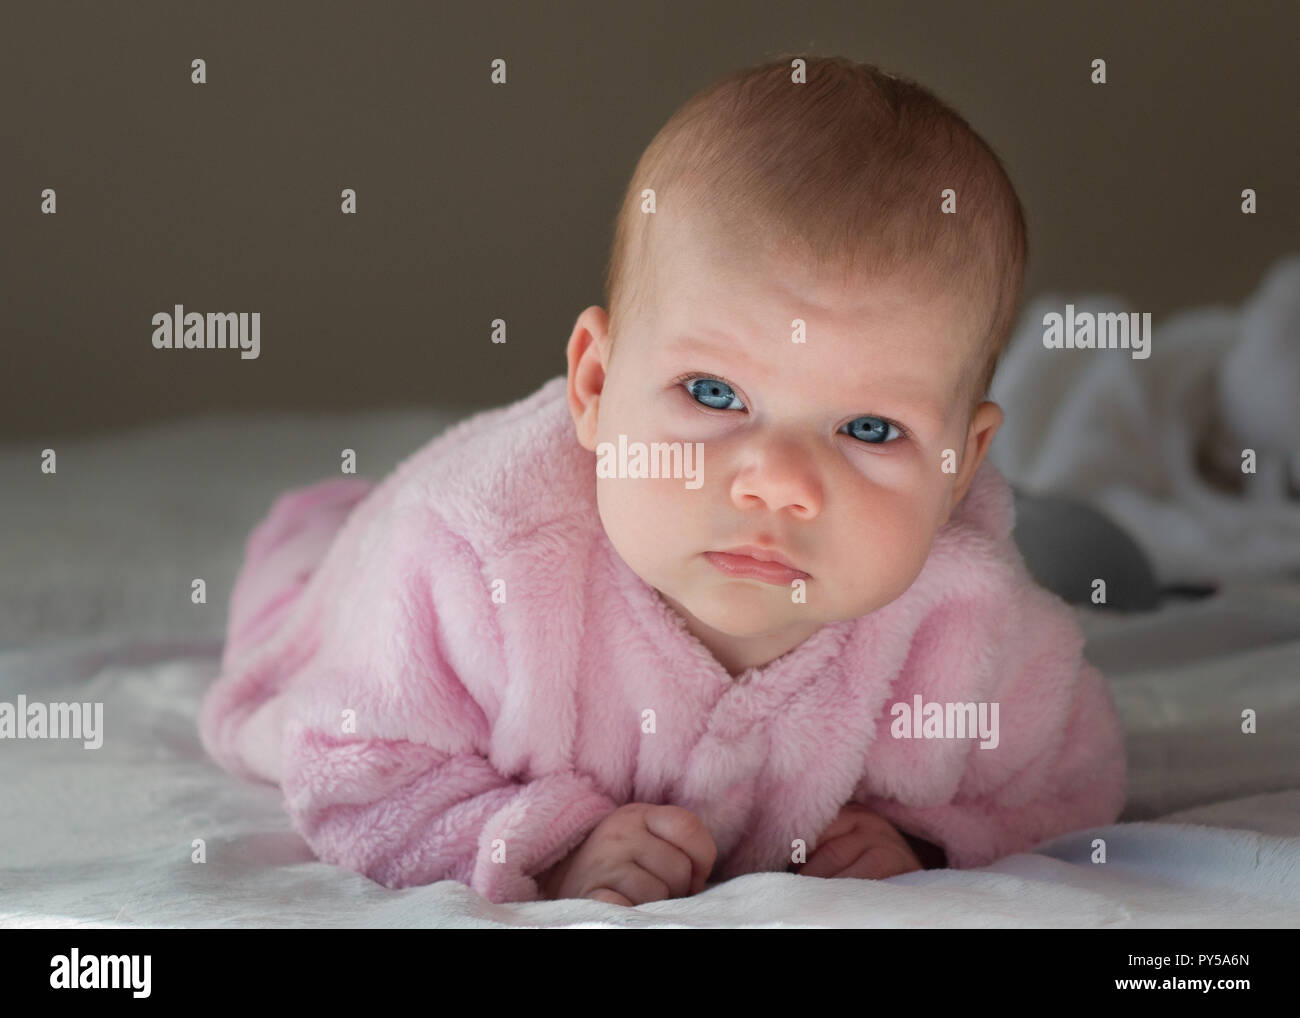 Baby girl laying on her stomach looking up at the camera with bright blue eyes wearing pink close up of her face. Stock Photo